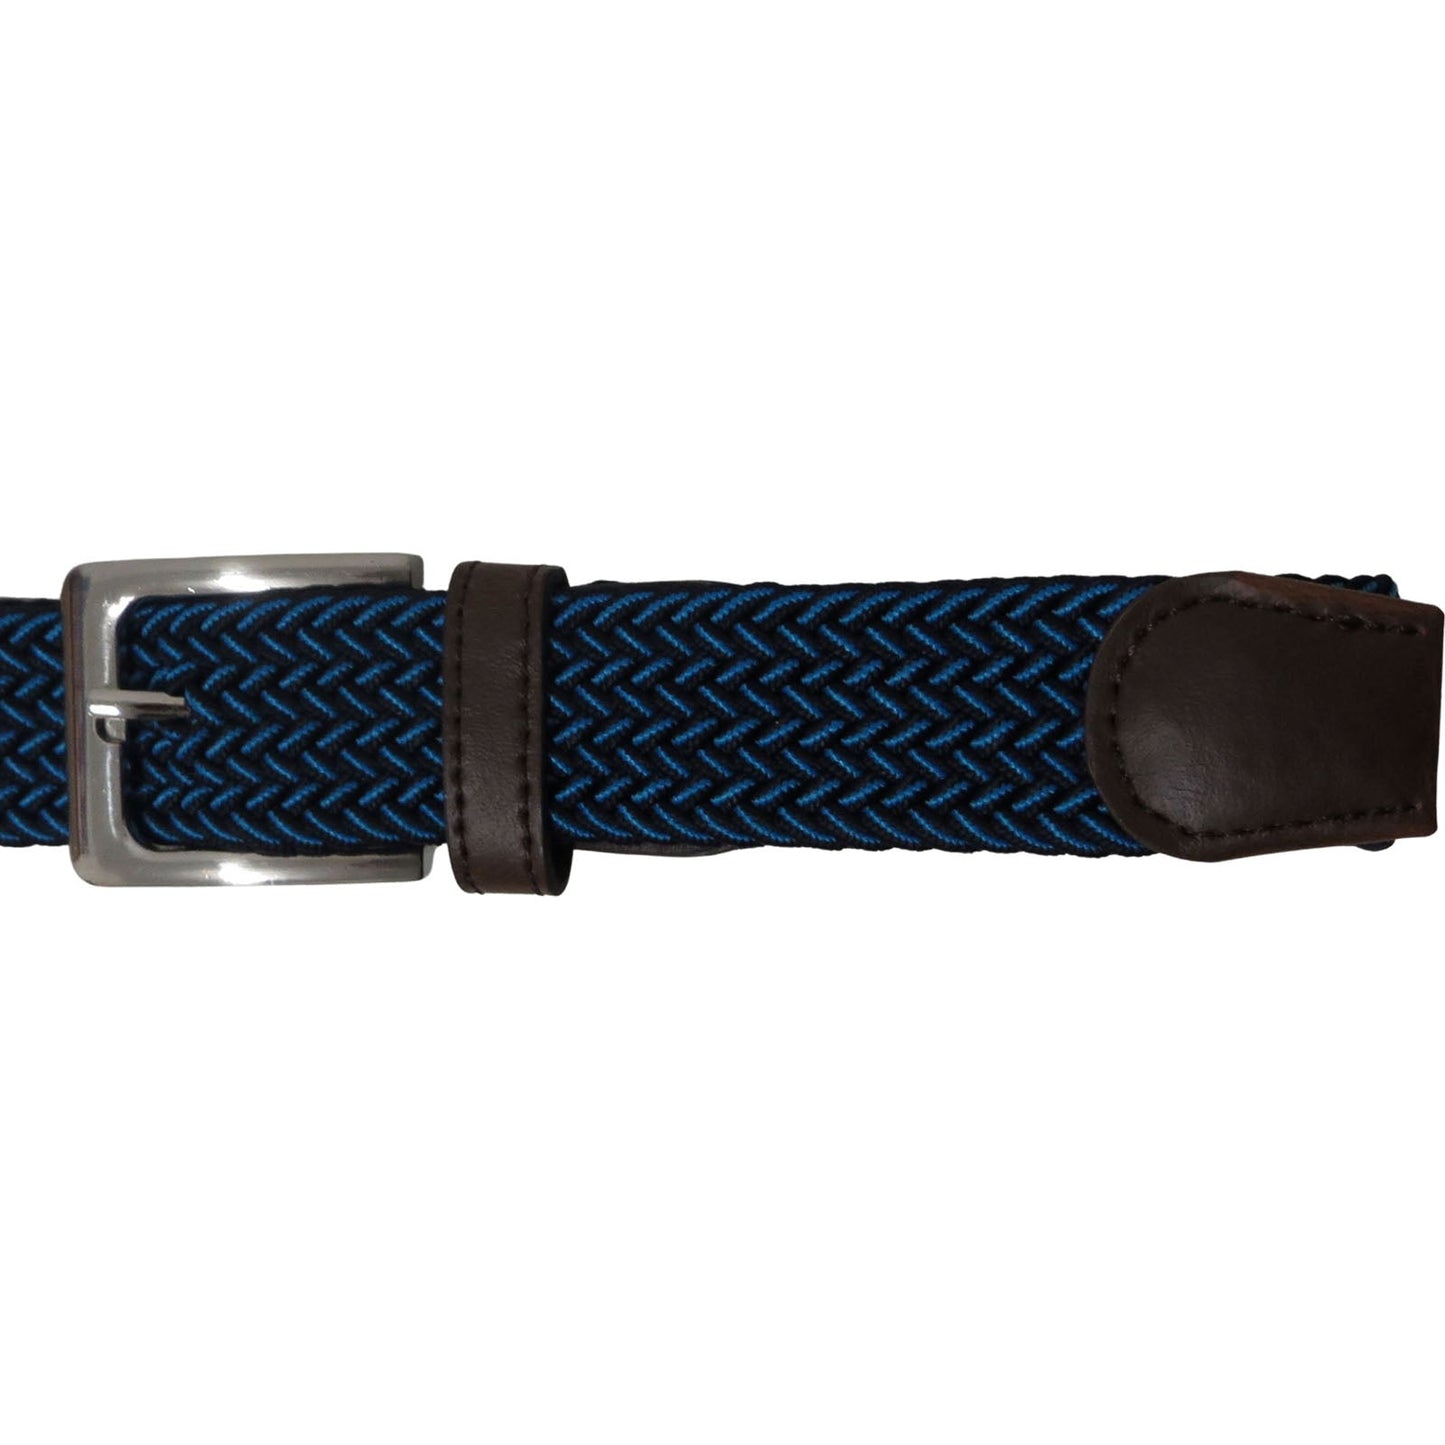 wholesale elastic stretch belt in a braided blue and black multicolor